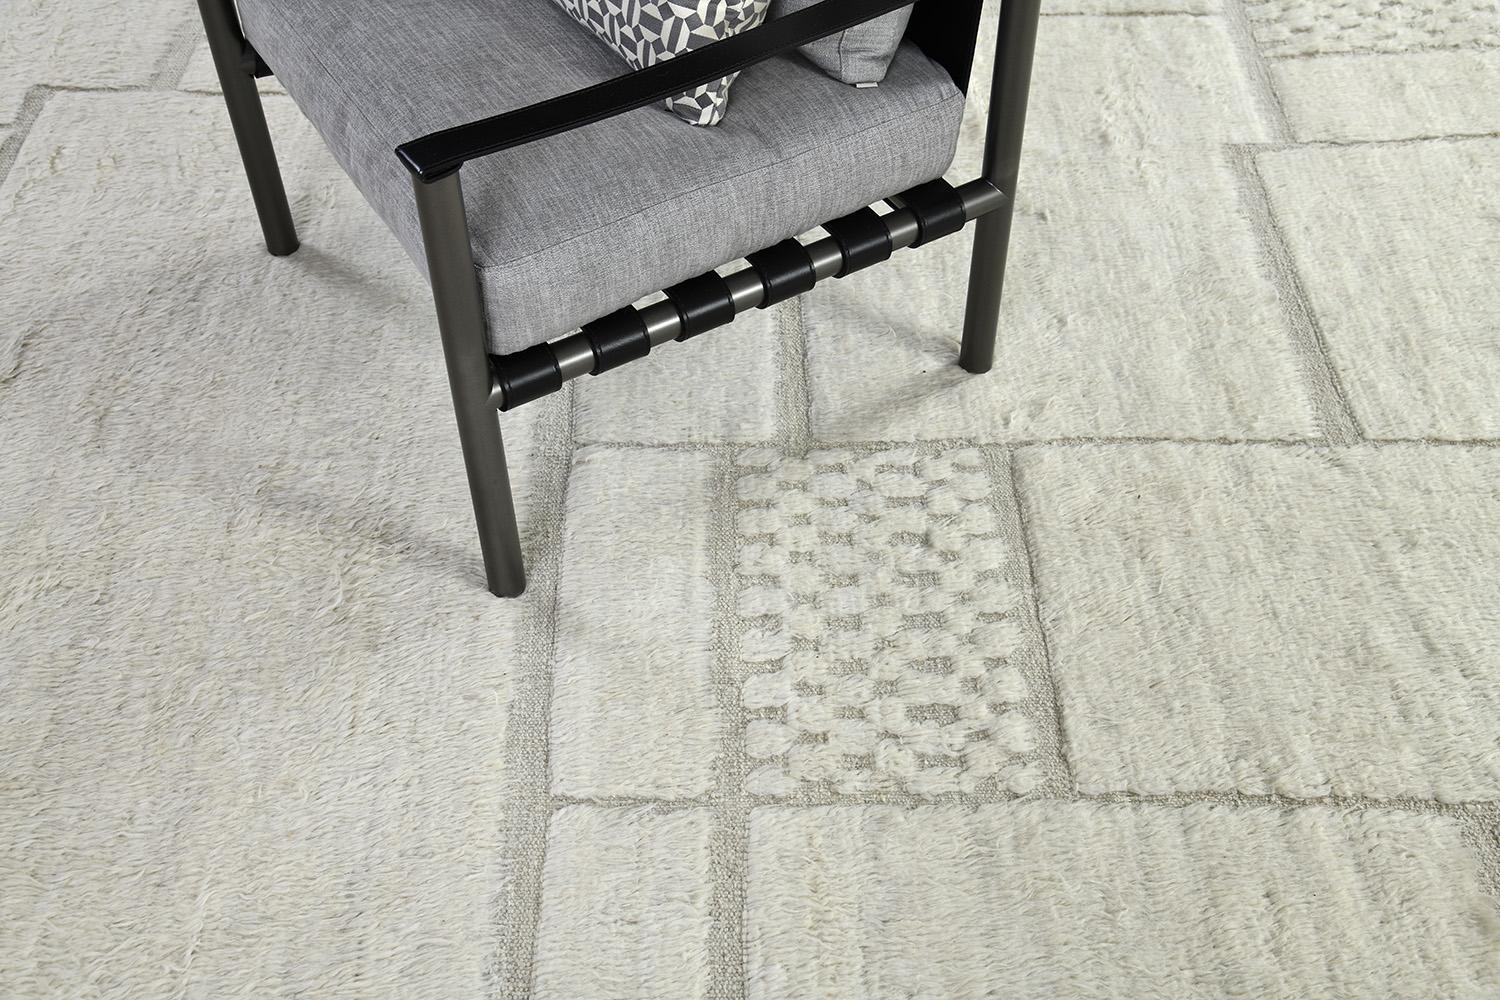 'Malmelah' is a beautiful textured rug with embossed detailing in checkered and rectangular shapes. Line work moving irregularly bring movement and are inspired by the Atlas Mountains in Morocco for the modern design world. The rug's bordering